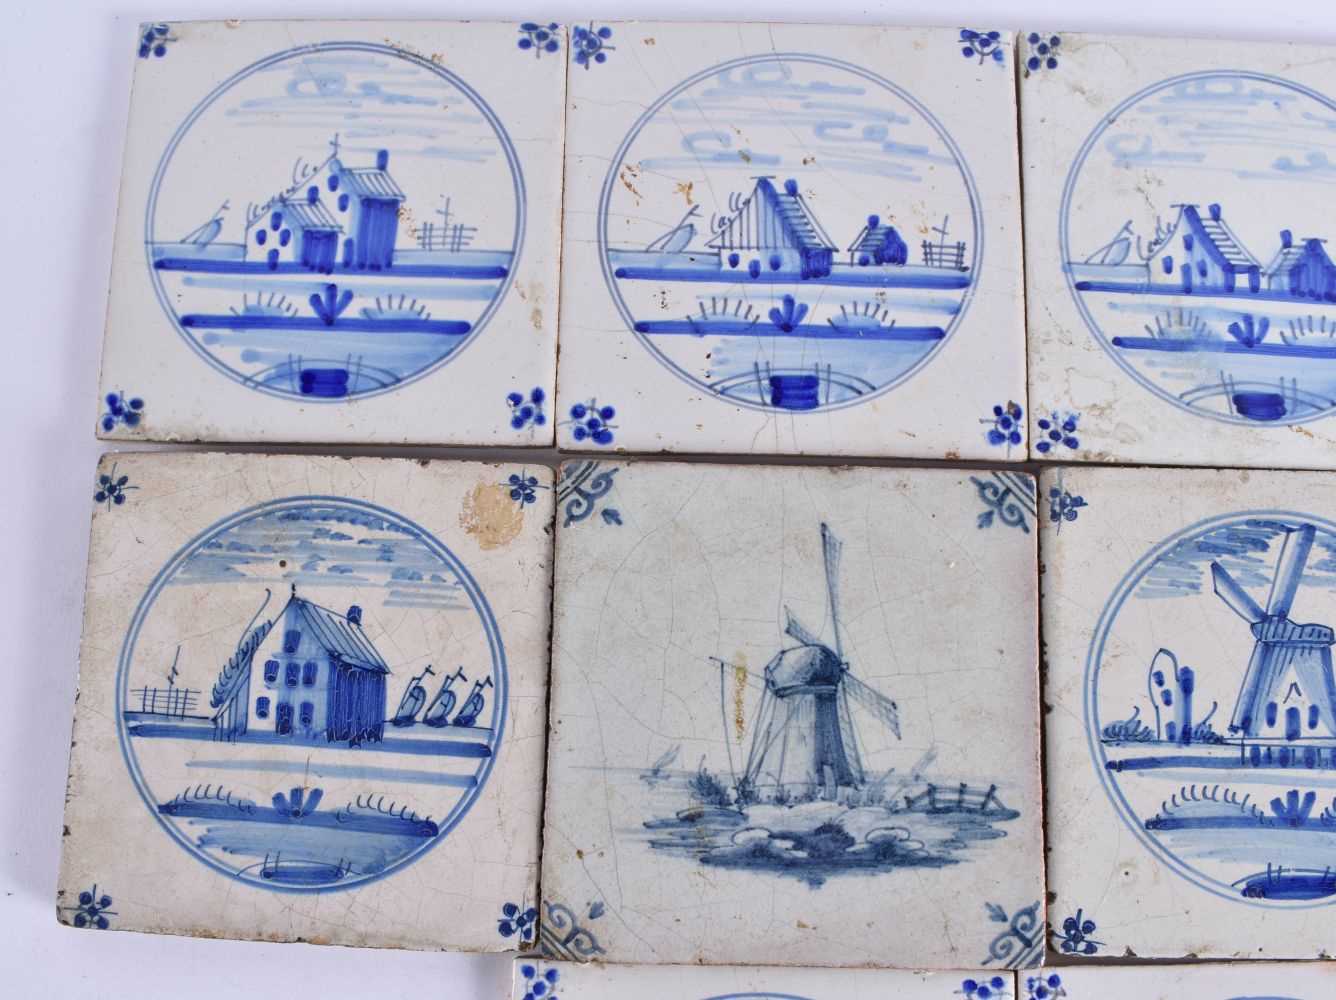 TEN DELFT BLUE AND WHITE POTTERY TILES. 12.5 cm square. (10) - Image 2 of 5